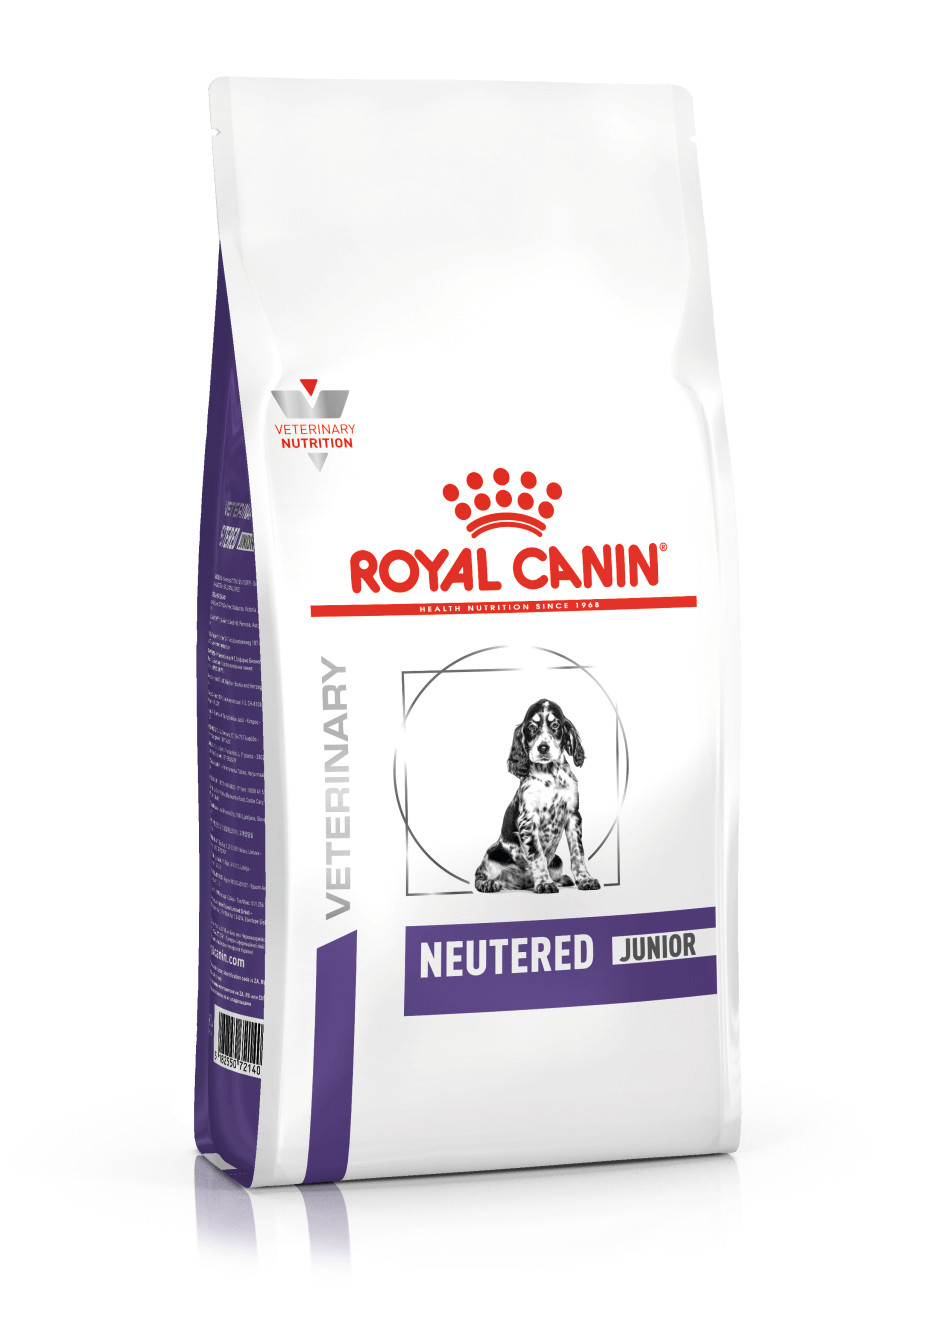 Royal Canin Veterinary Neutered Junior pour chien